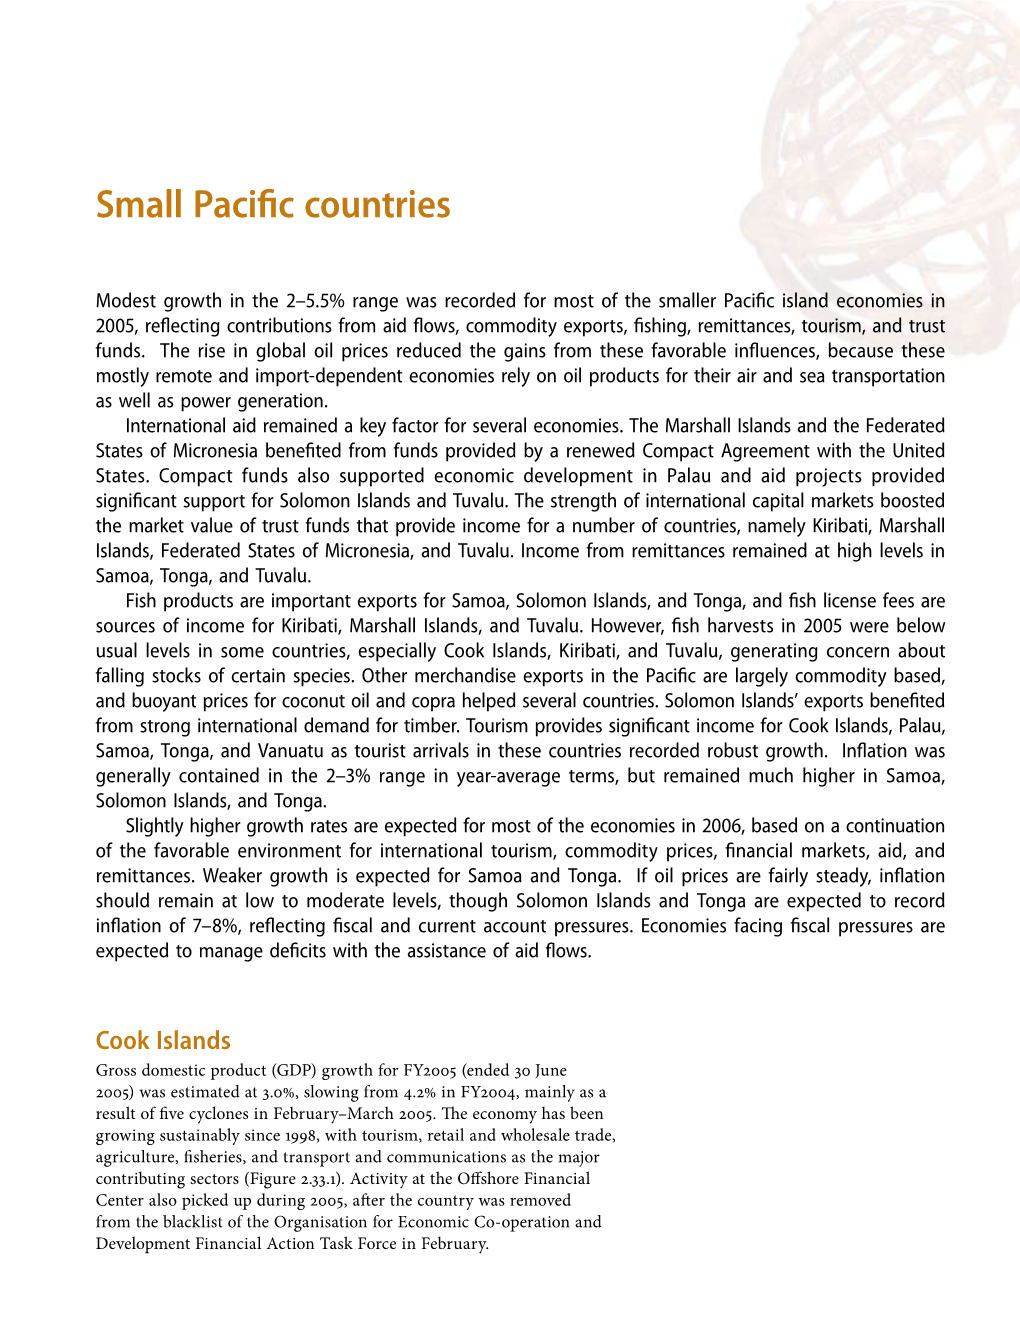 Small Pacific Countries